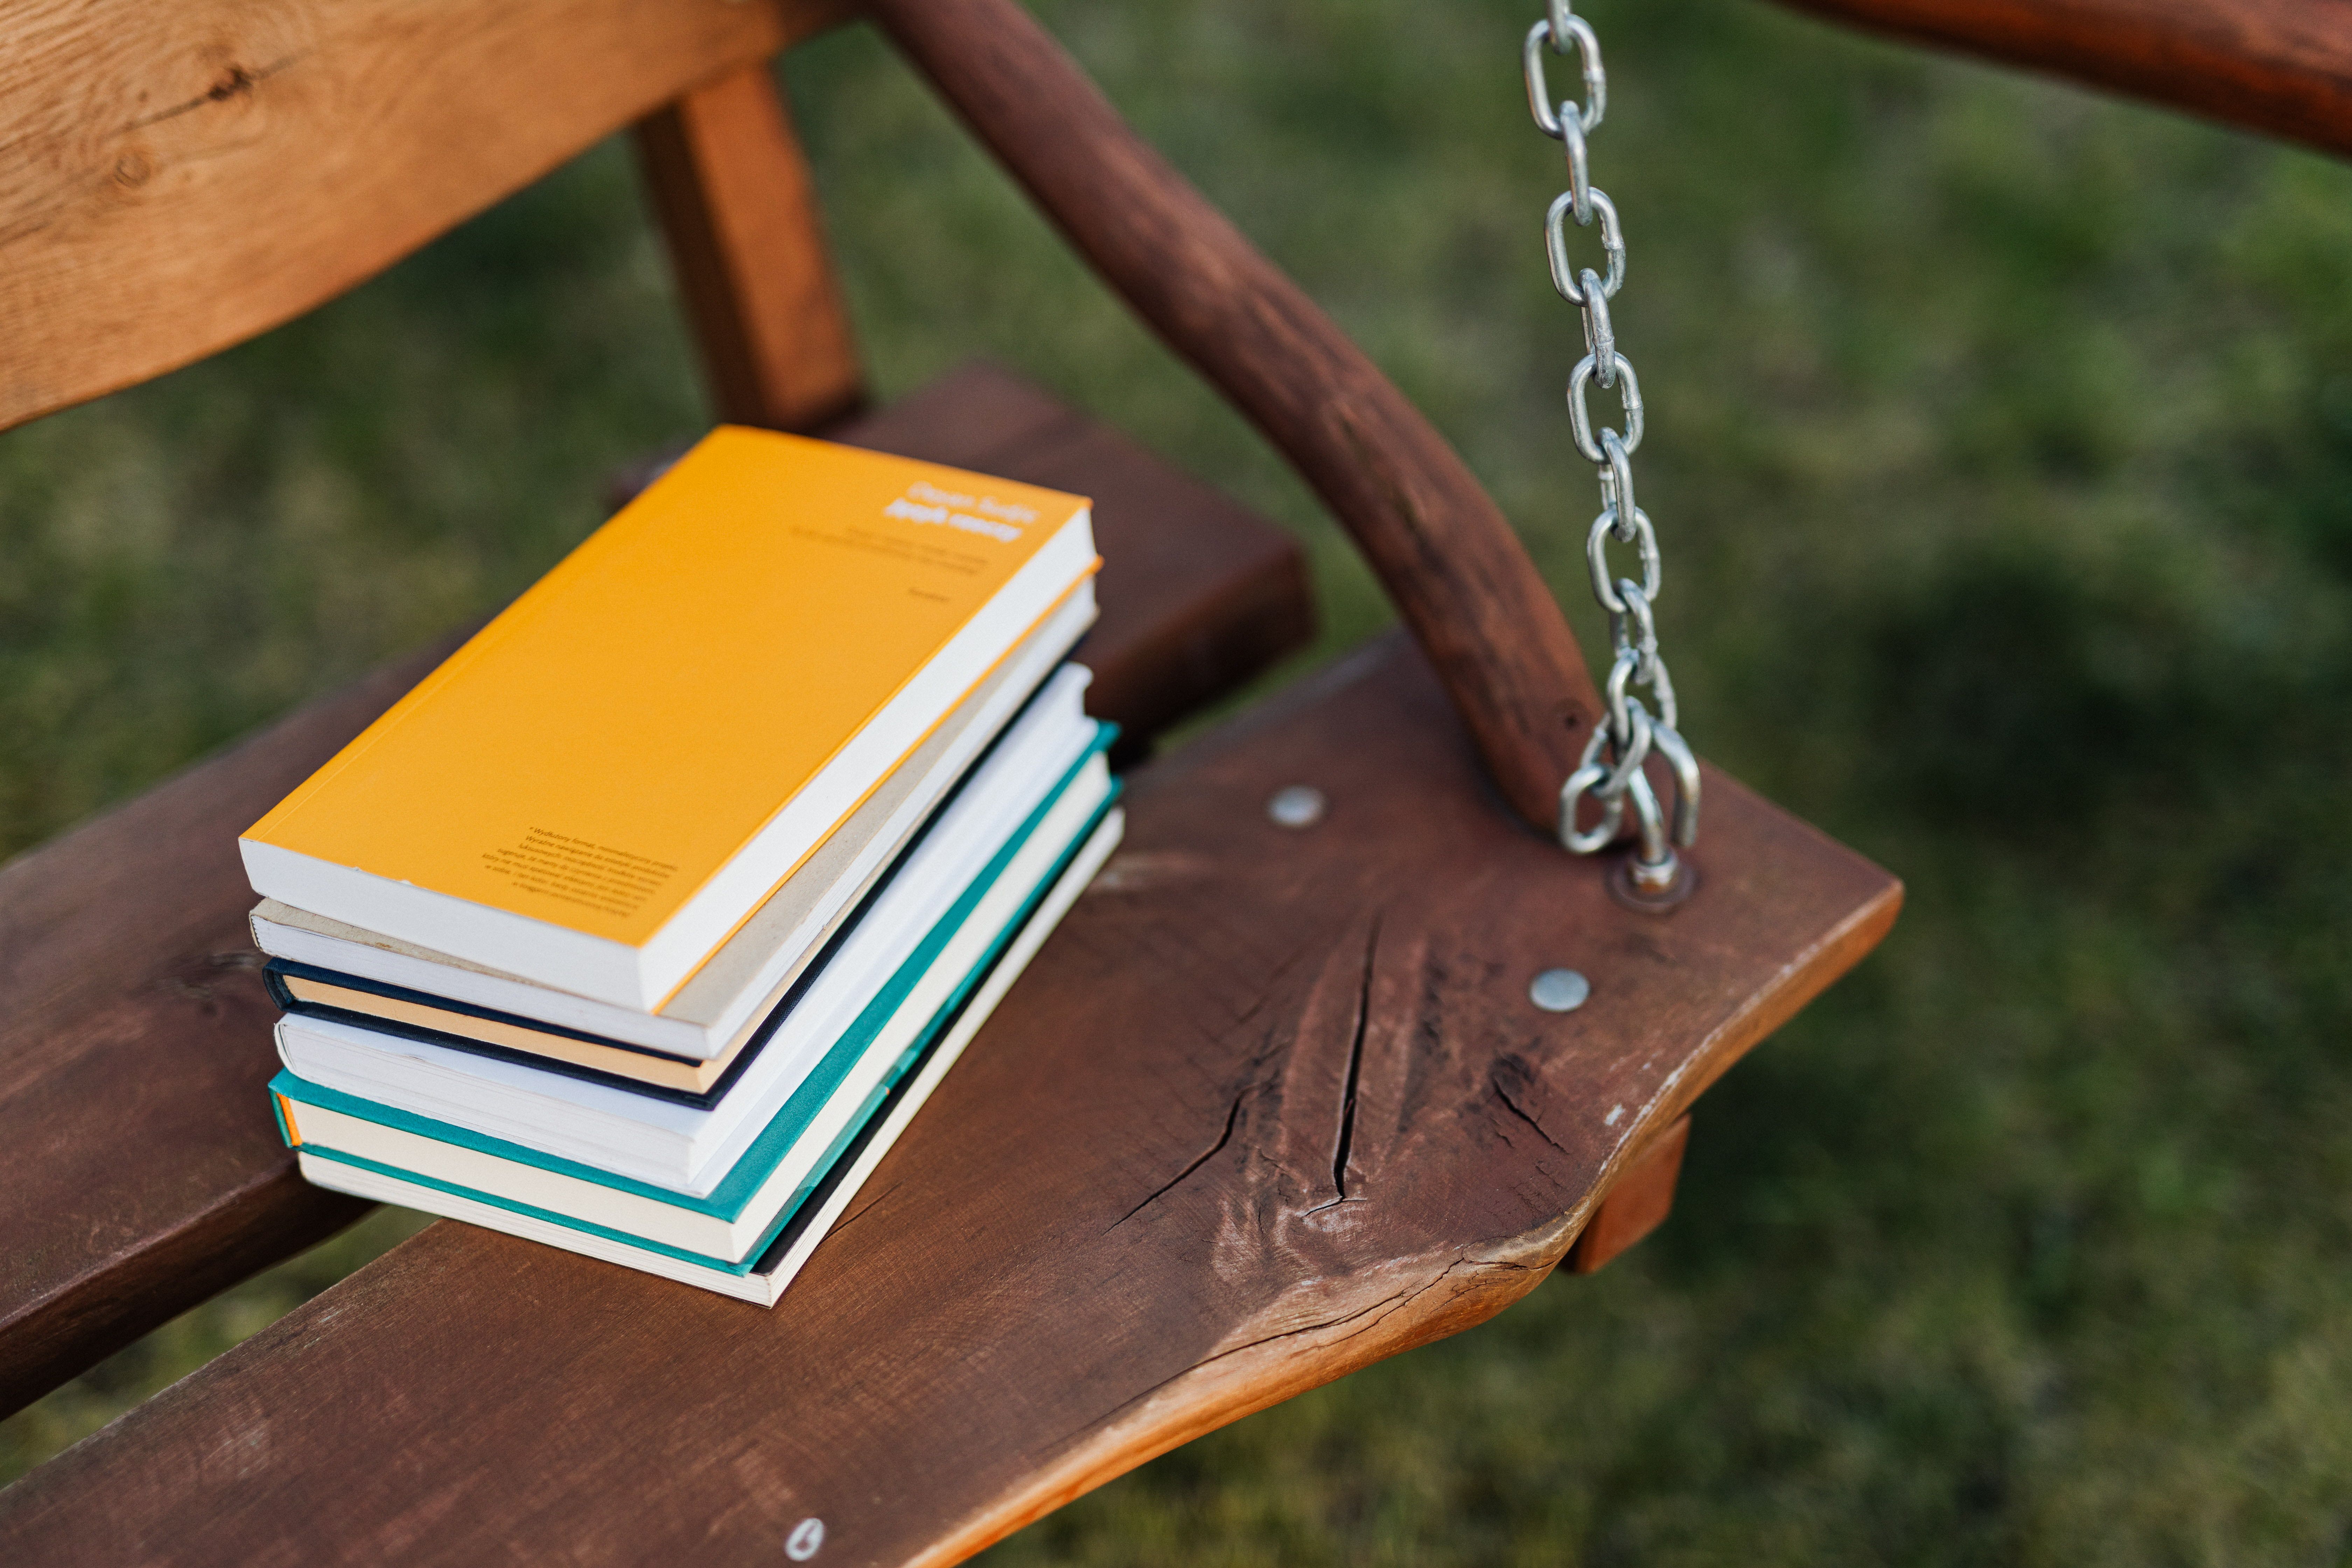 A stack of books sits on an outdoor wooden swing